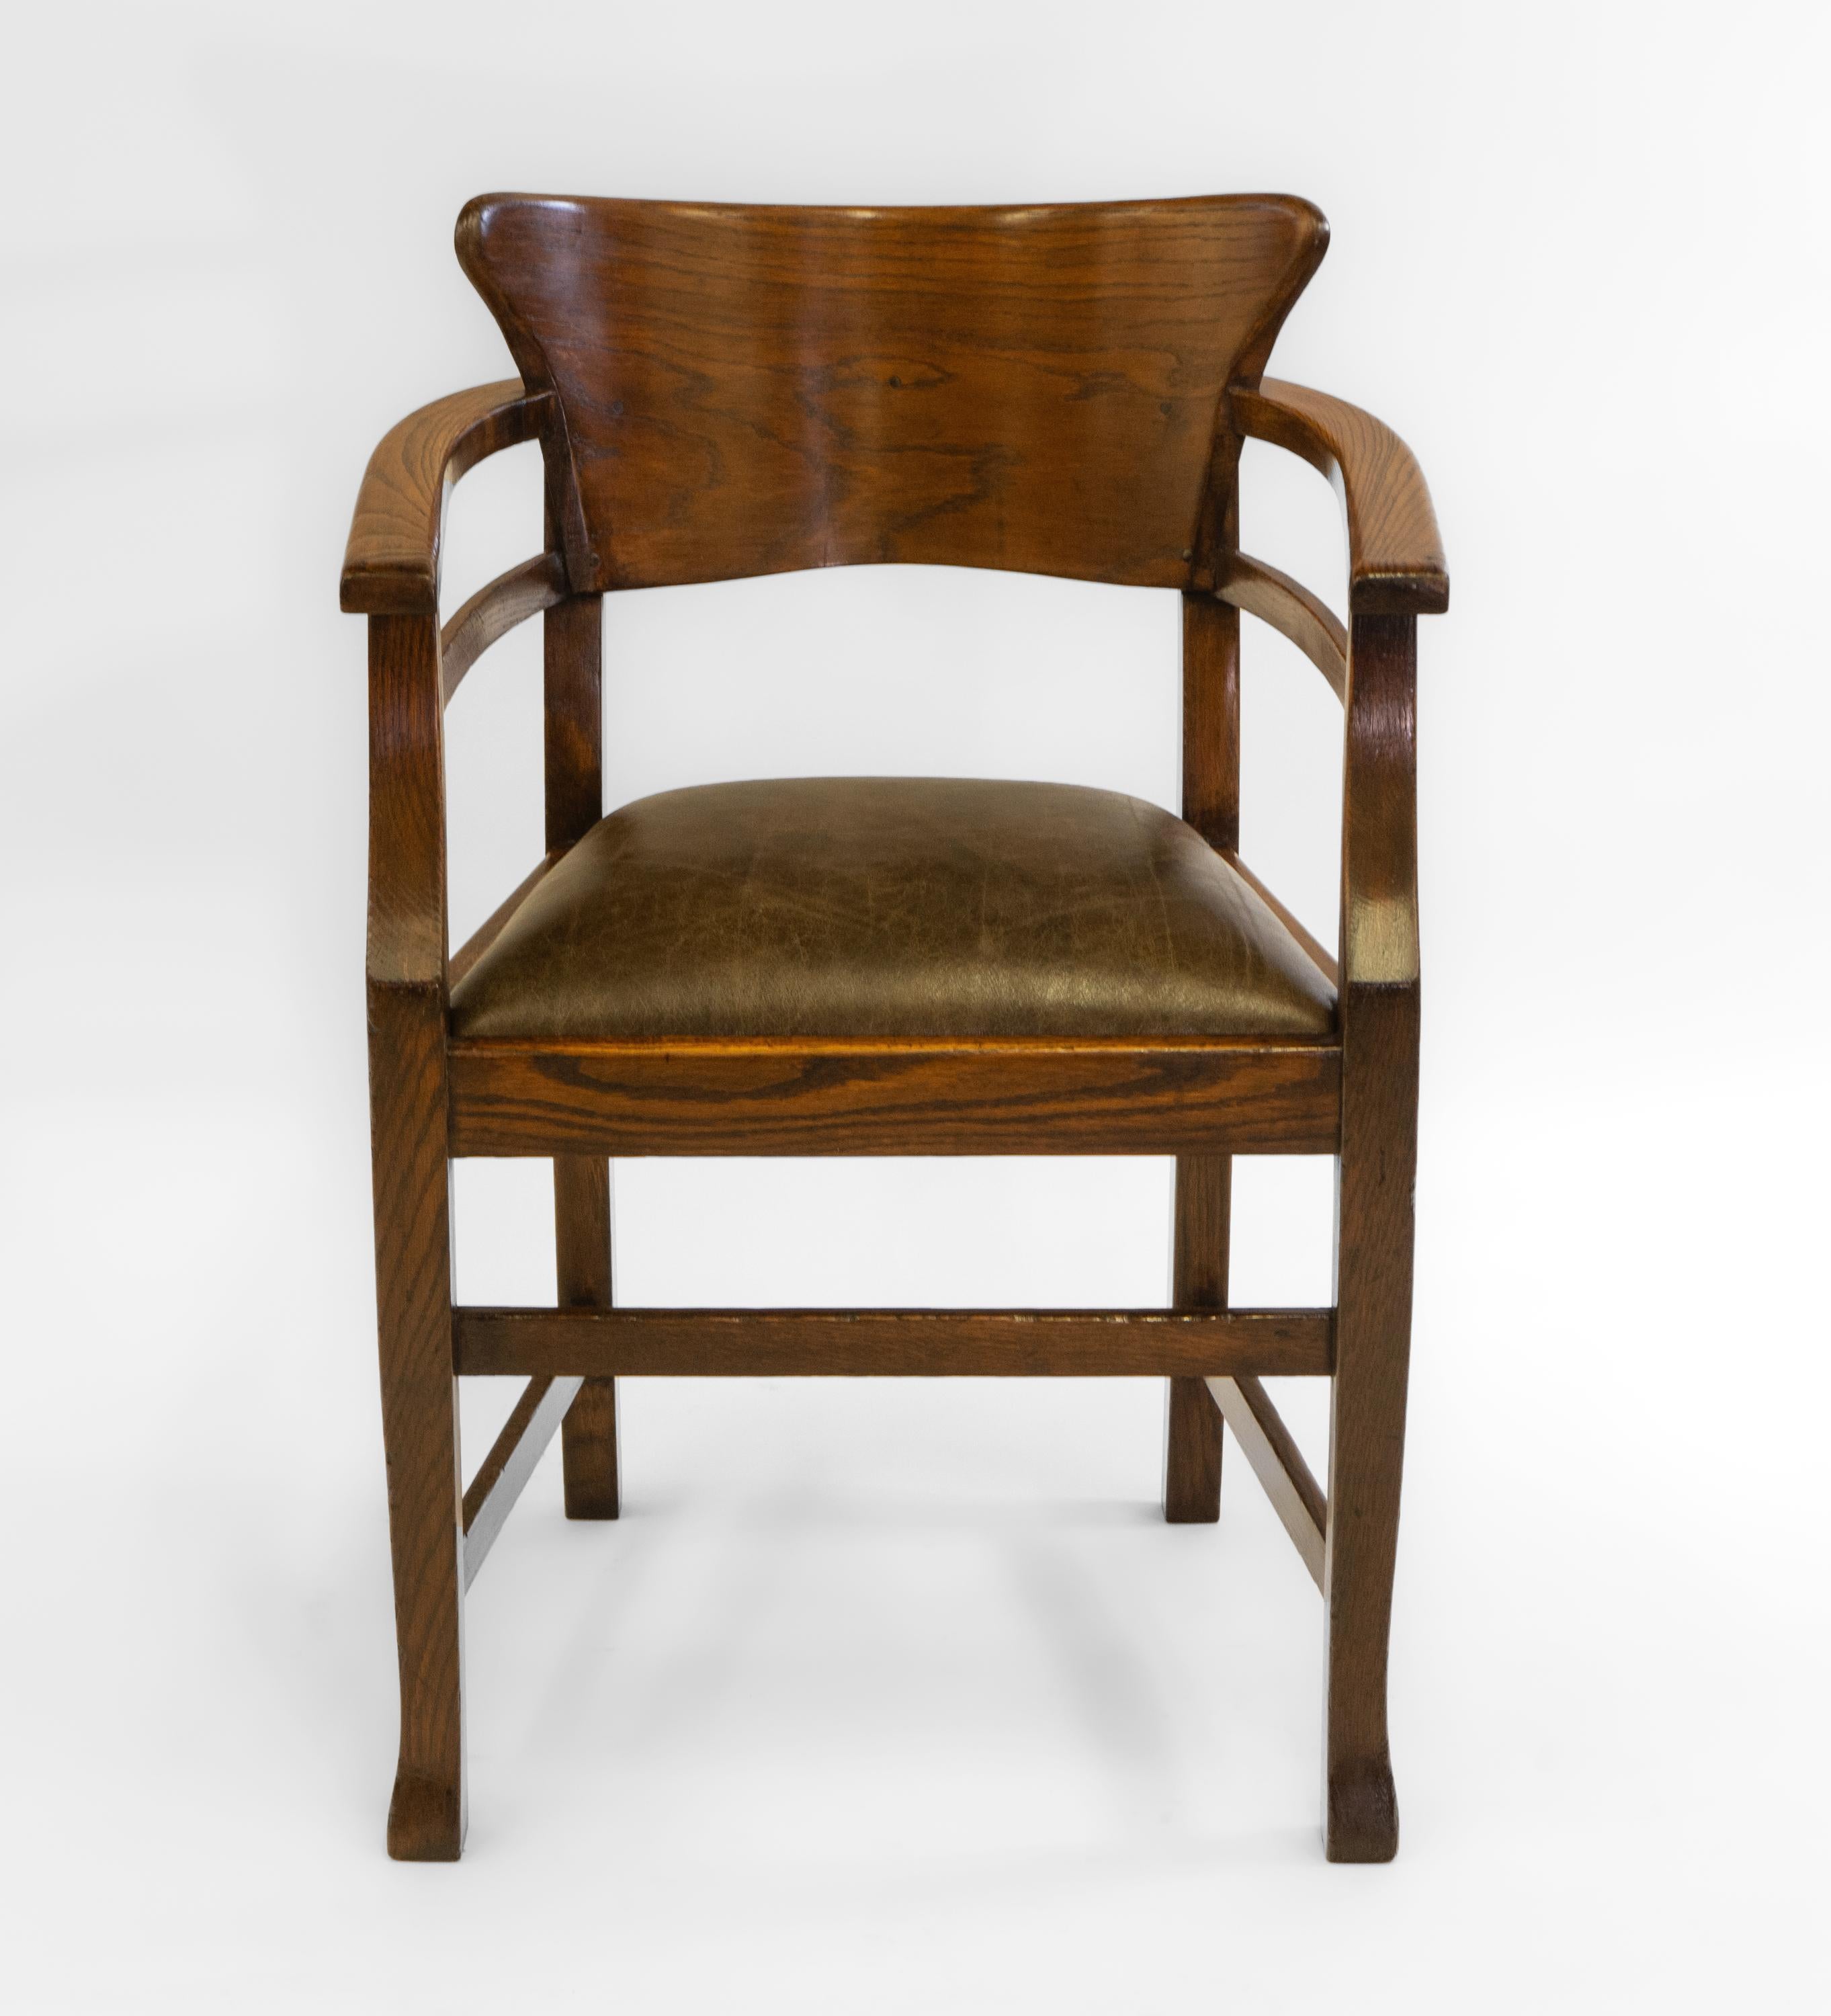 Arts & Crafts oak and leather desk chair, Jugendstil, in the Richard Riemerschmid manner. Retailer's label: Solomon Bros, London. Circa 1900. 

The chair has a continuous arm around the peg constructed shaped back. The drop-in seat has been